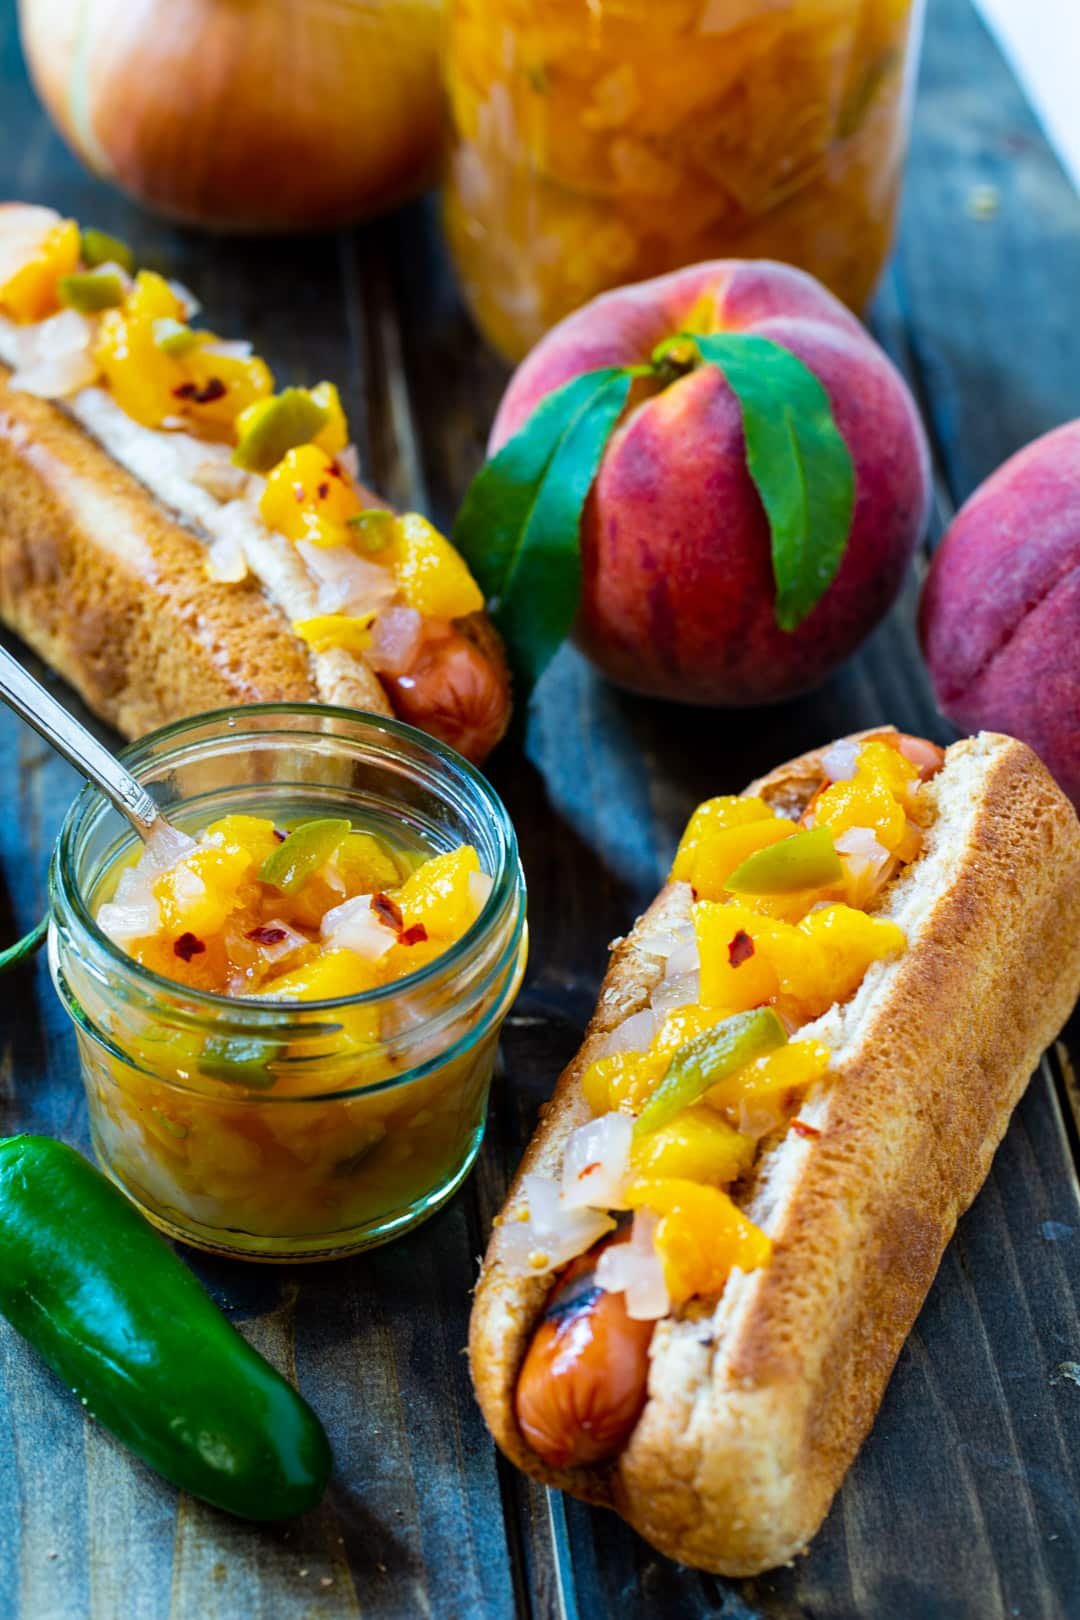 Peach Relish on top of Hot Dogs.